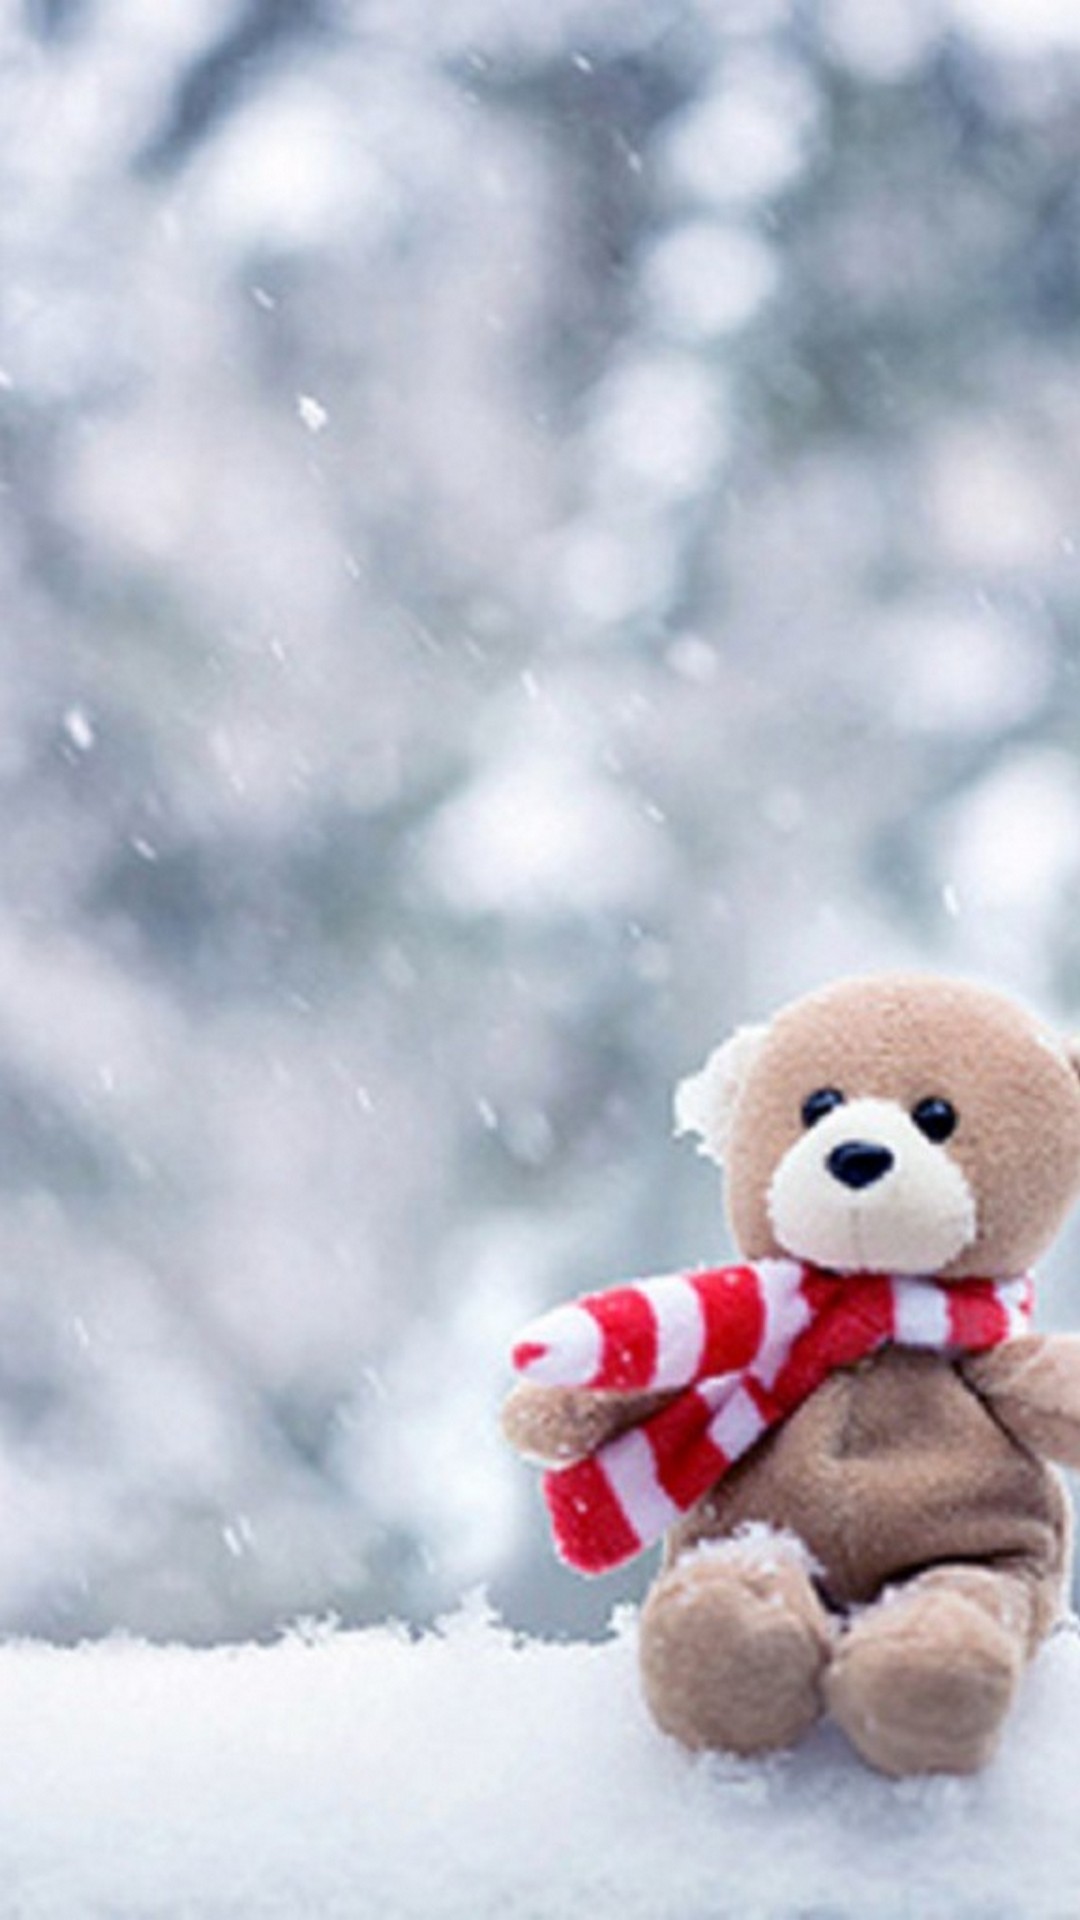 teddy wallpapers for mobile,teddy bear,stuffed toy,toy,snow,winter